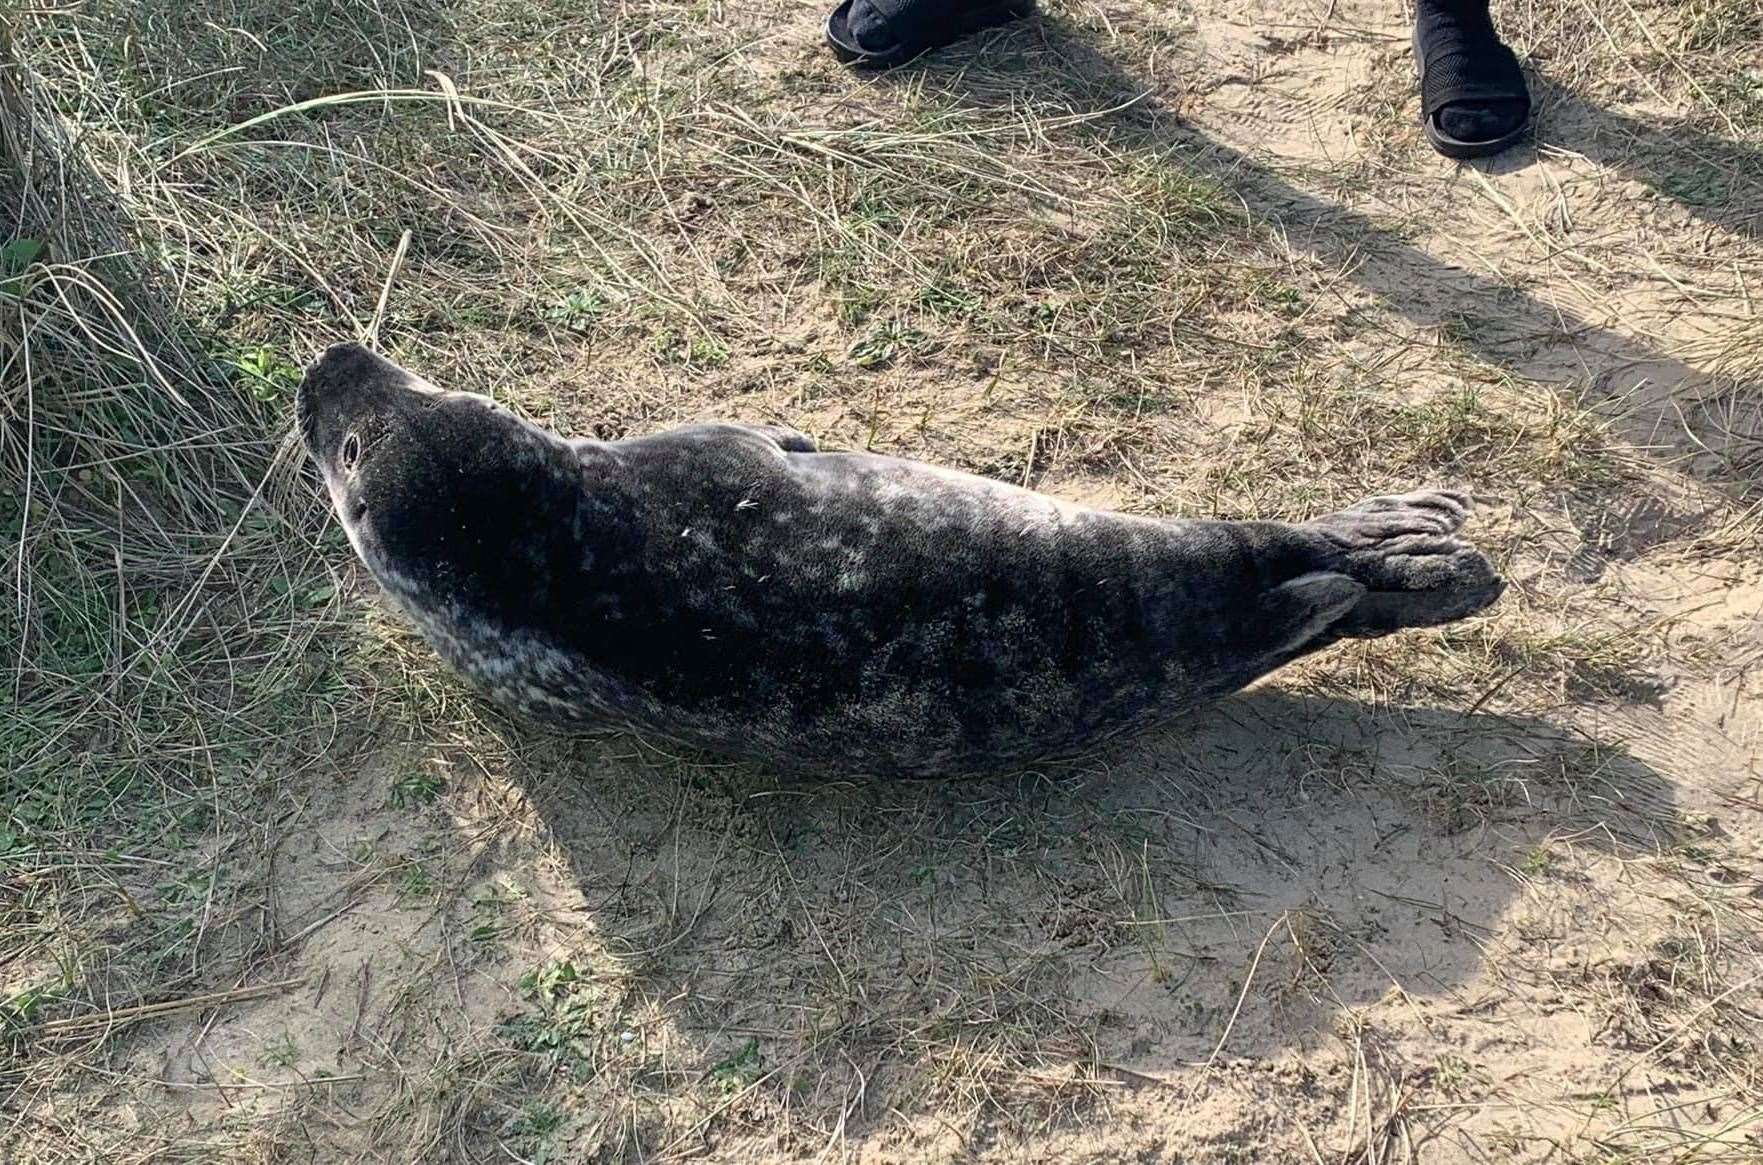 This adorable seal pup was found on Greatstone beach on Tuesday, but was rescued after he was found underweight and injured